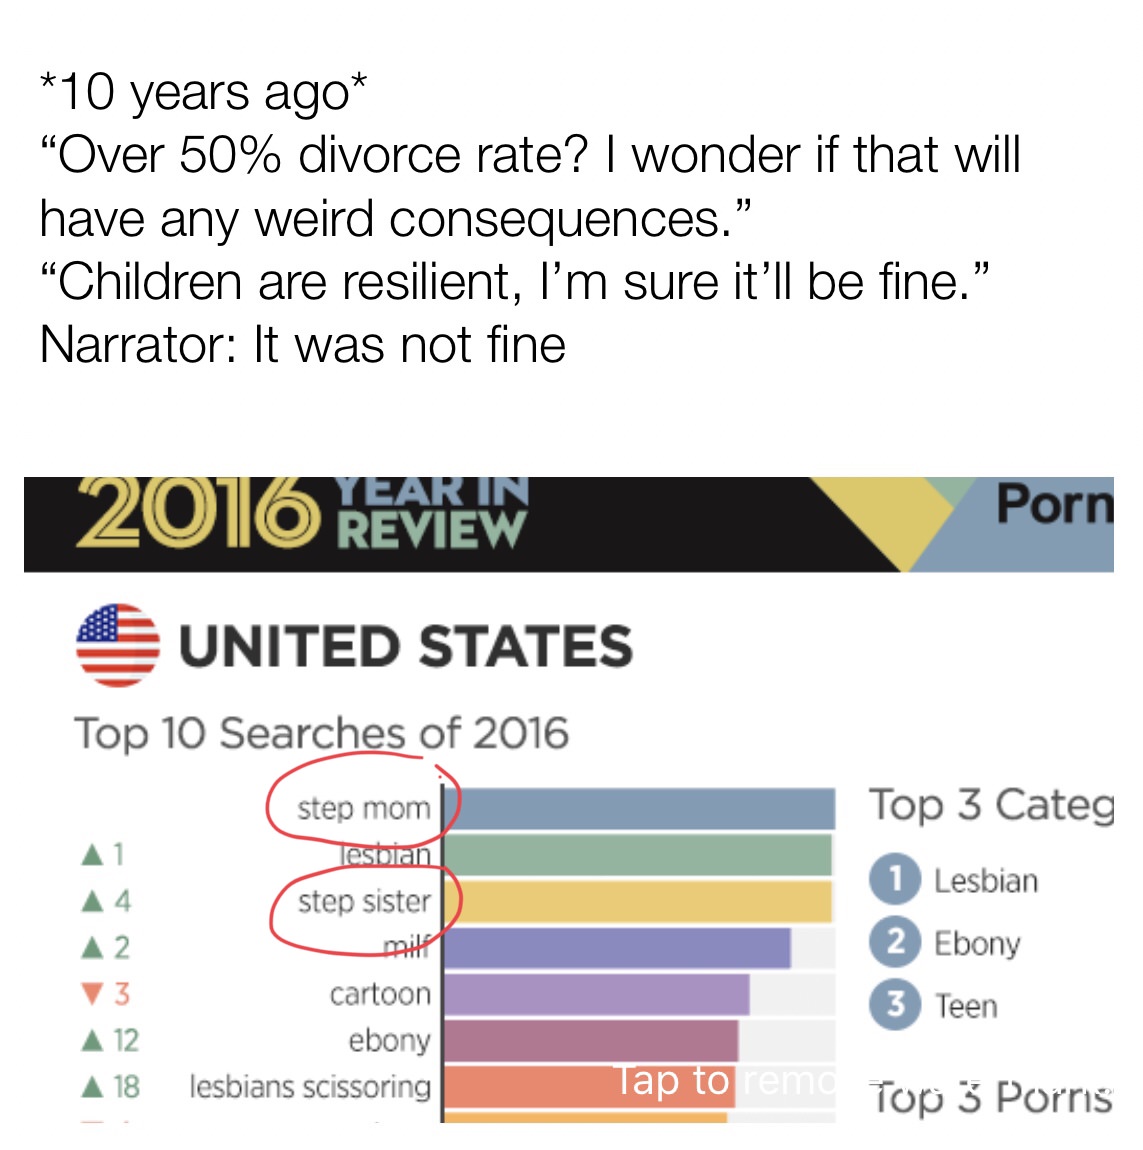 lesbian divorce rate - 10 years ago "Over 50% divorce rate? I wonder if that will have any weird consequences. Children are resilient, I'm sure it'll be fine." Narrator It was not fine Year In Review Porn 2016 Review United States Top 10 Searches of 2016 